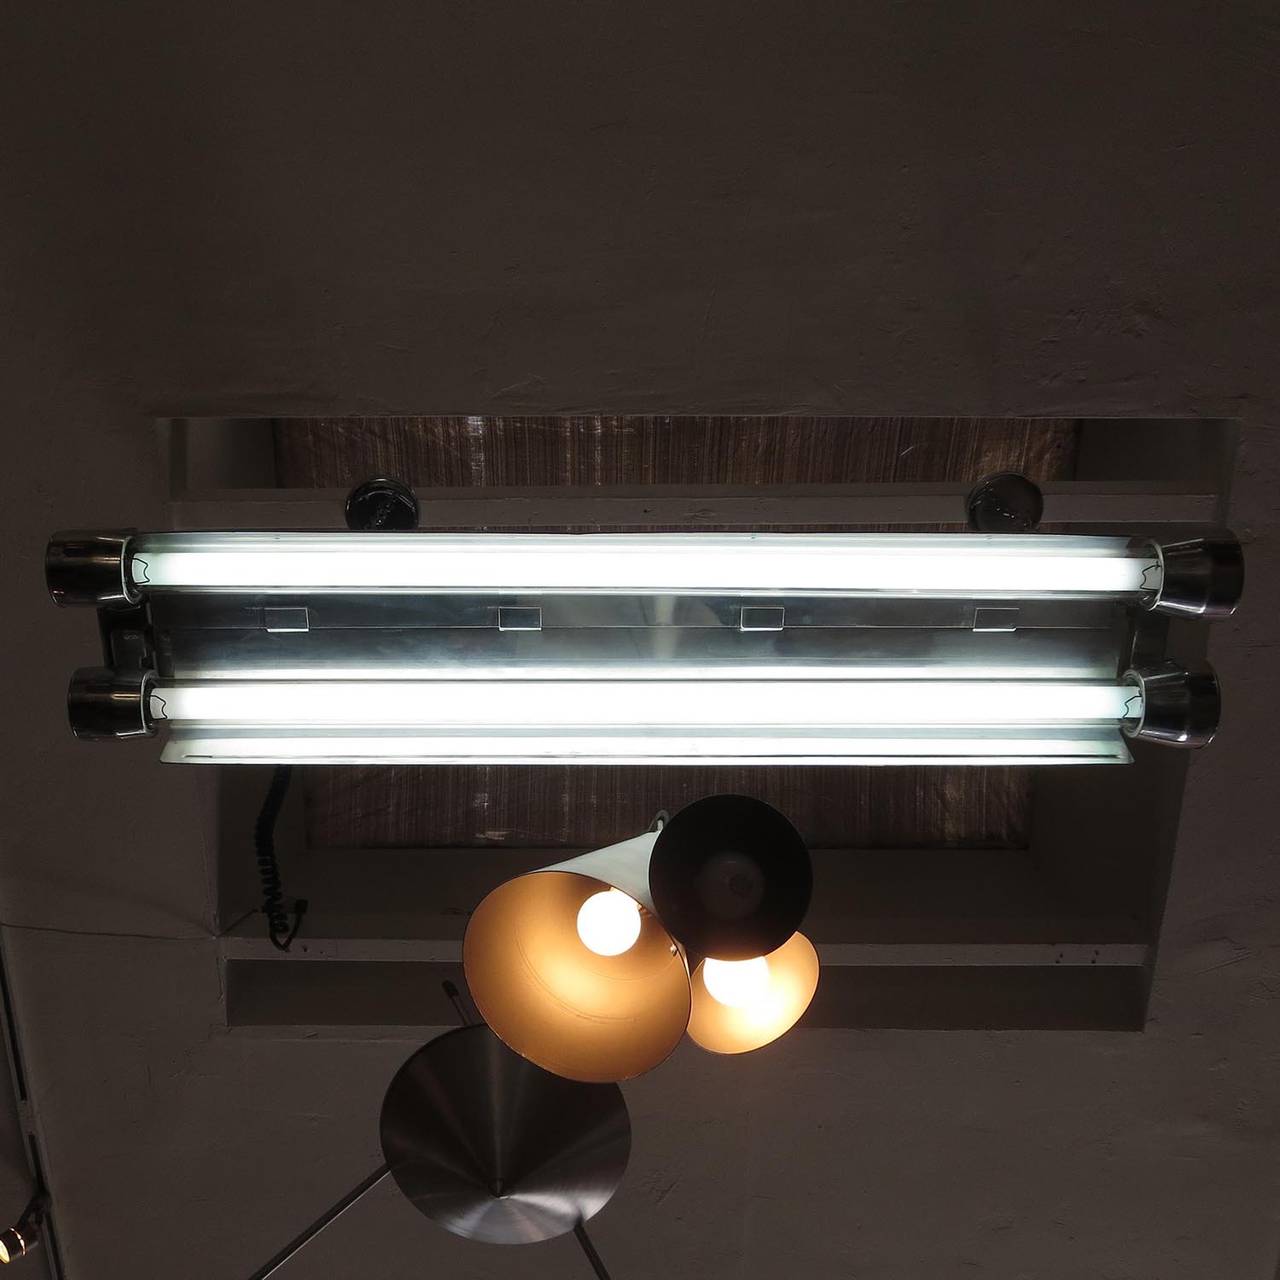 The ultimate in Industrial lighting! This Crouse Hinds lamp was designed for naval use, and made to withstand the most intense conditions. The two fluorescent tubes are surrounded by 